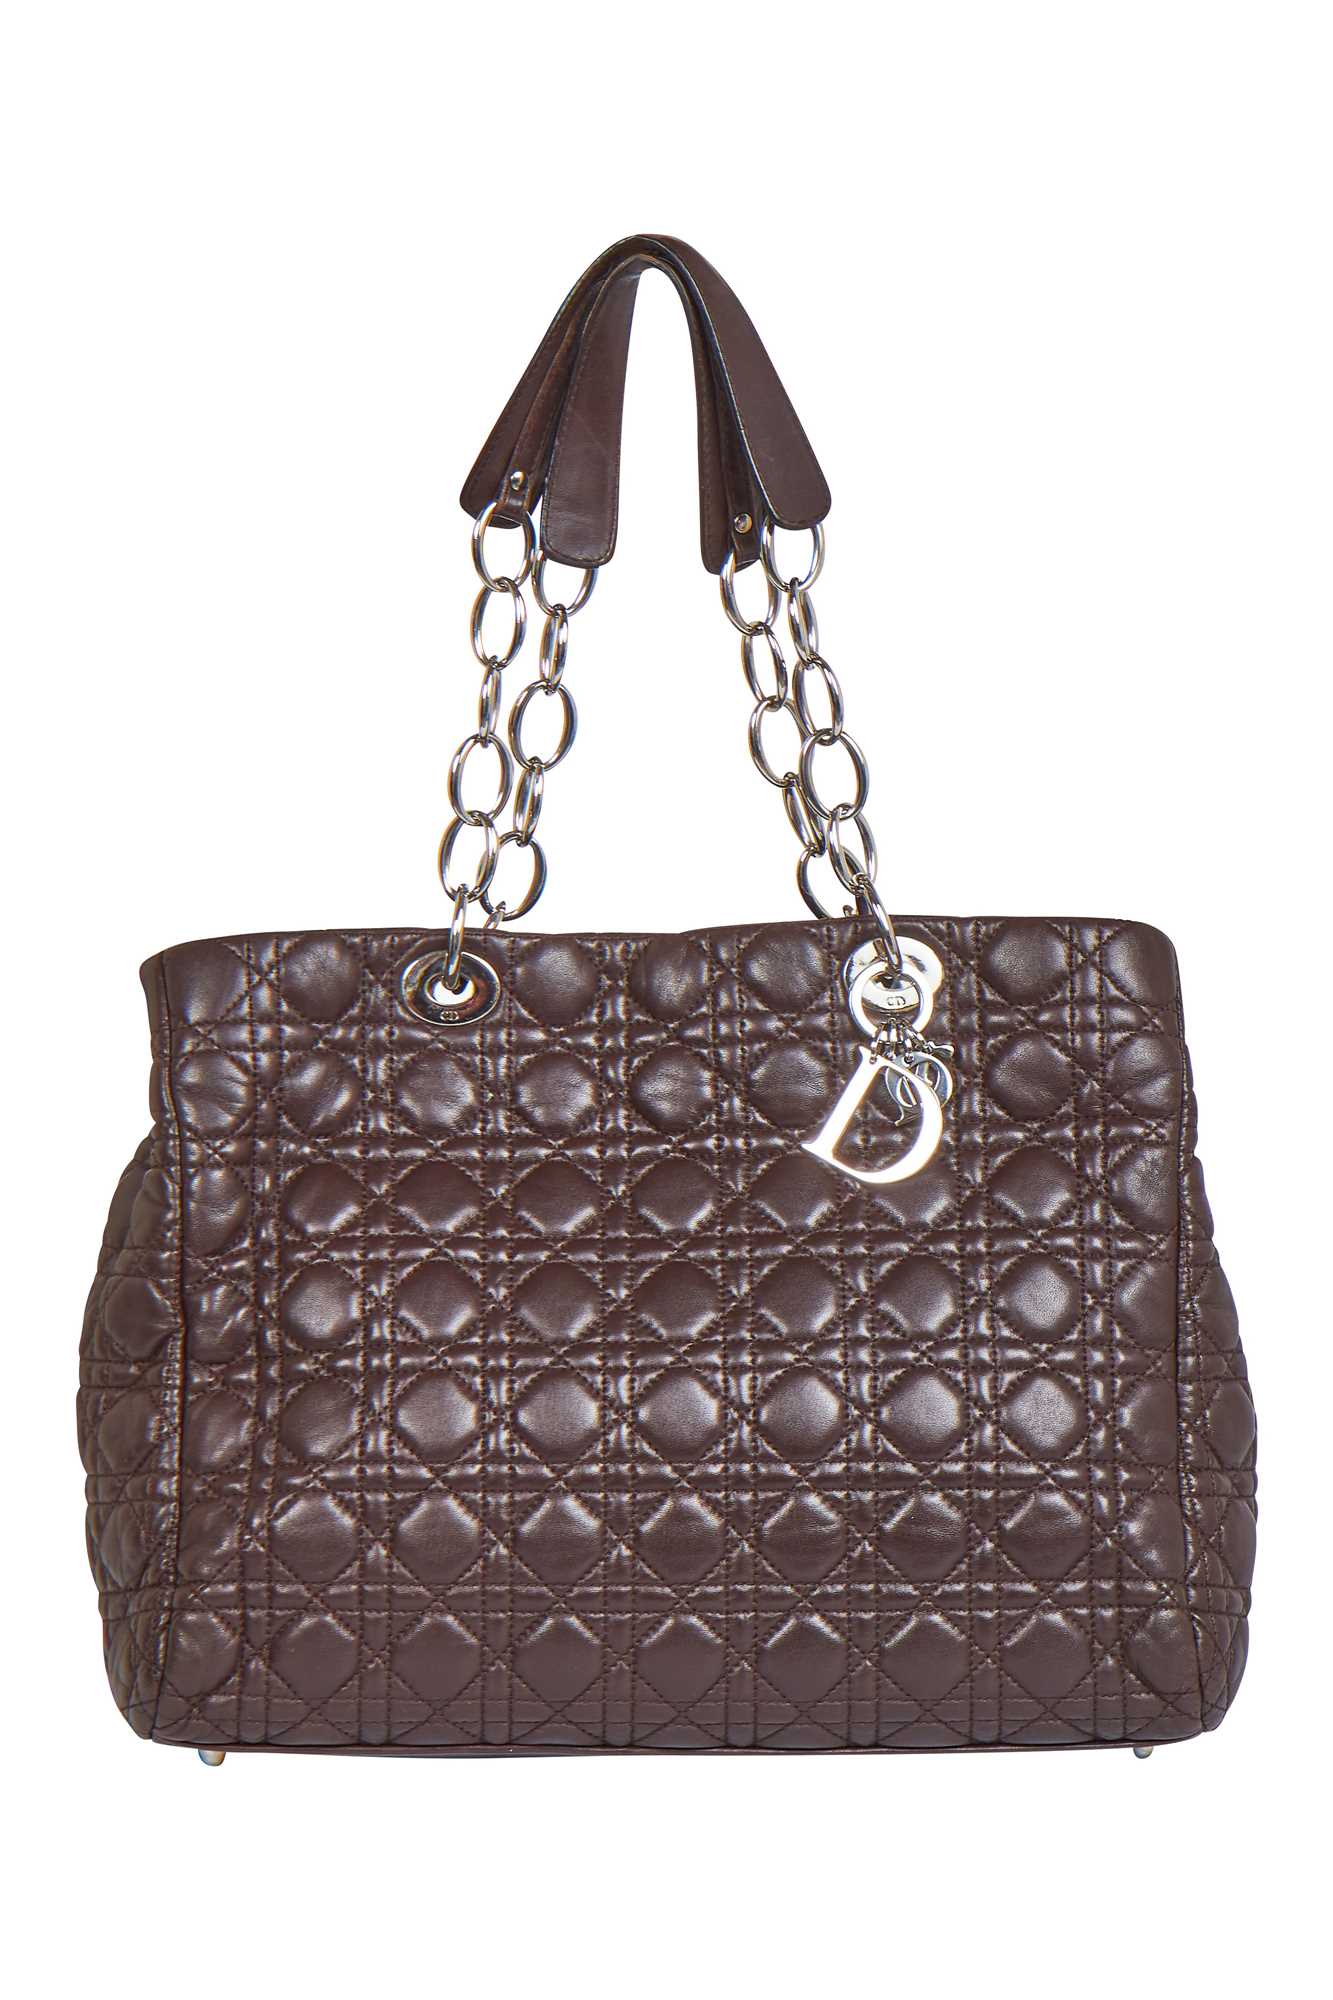 Lot 37 - A Dior 'cannage' quilted brown lambskin leather shopping tote bag, 2000s